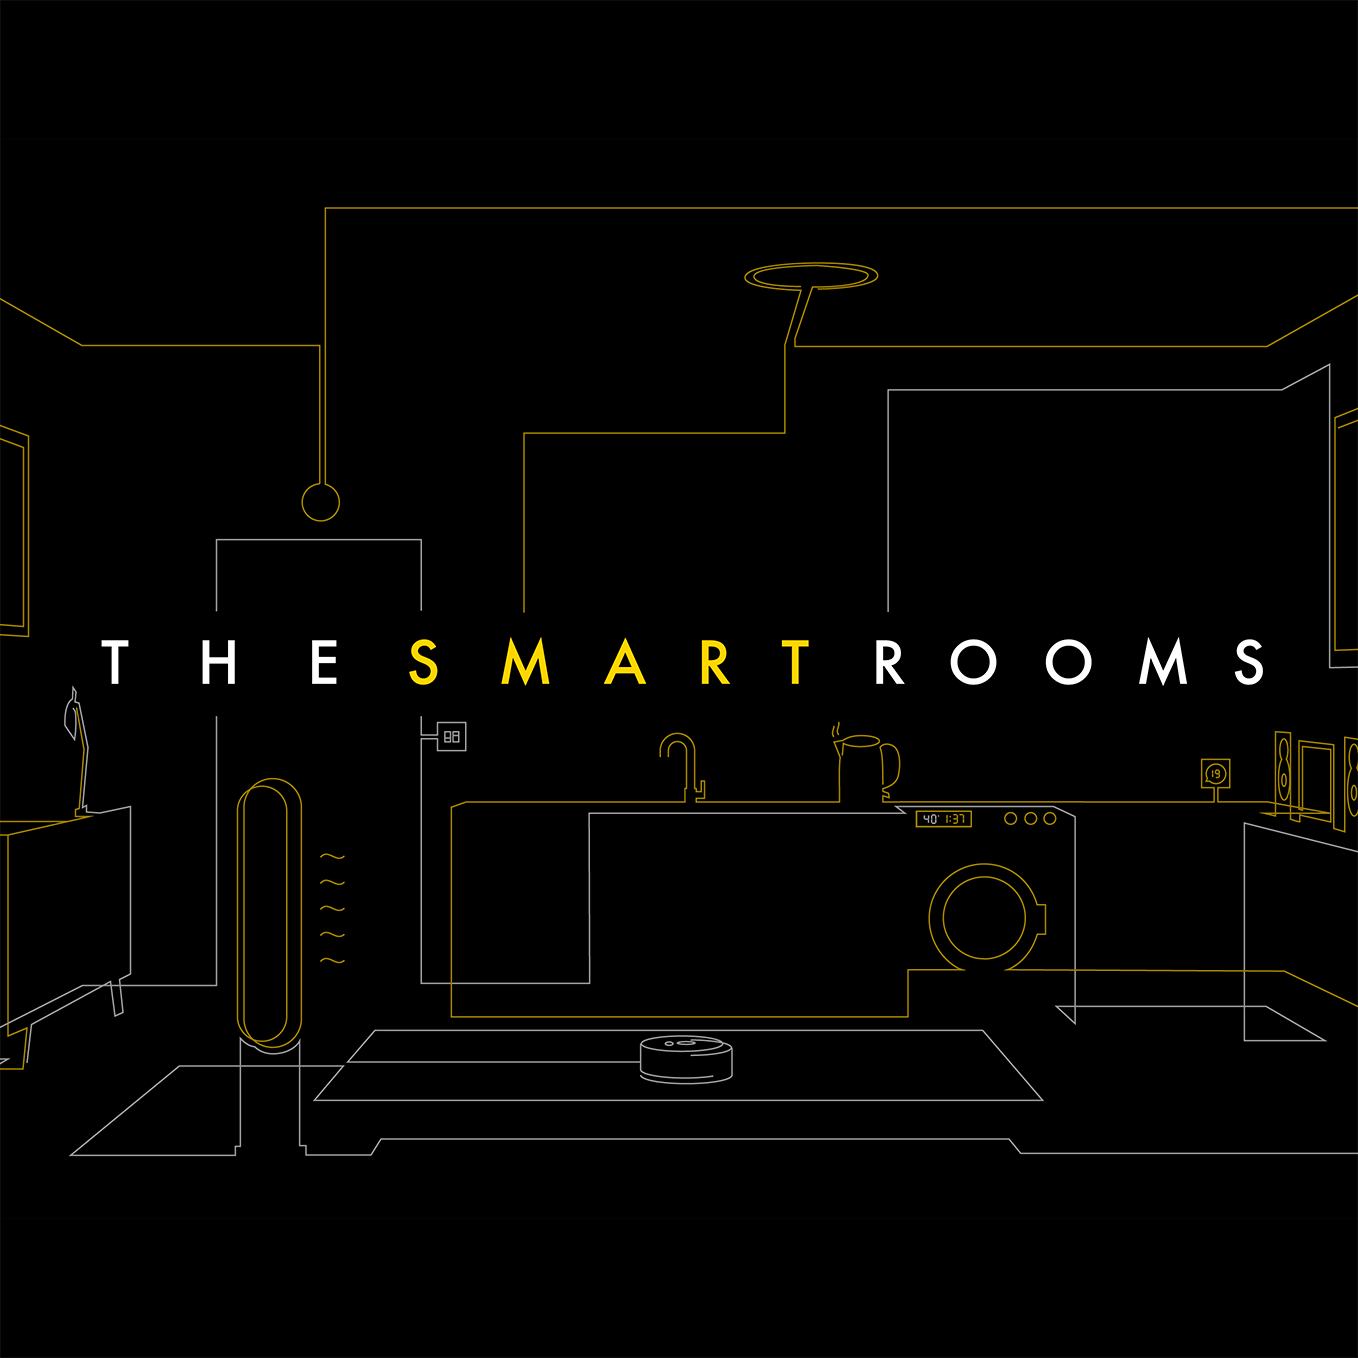 "The Smart Rooms" logo, over line-drawings of a kitchen